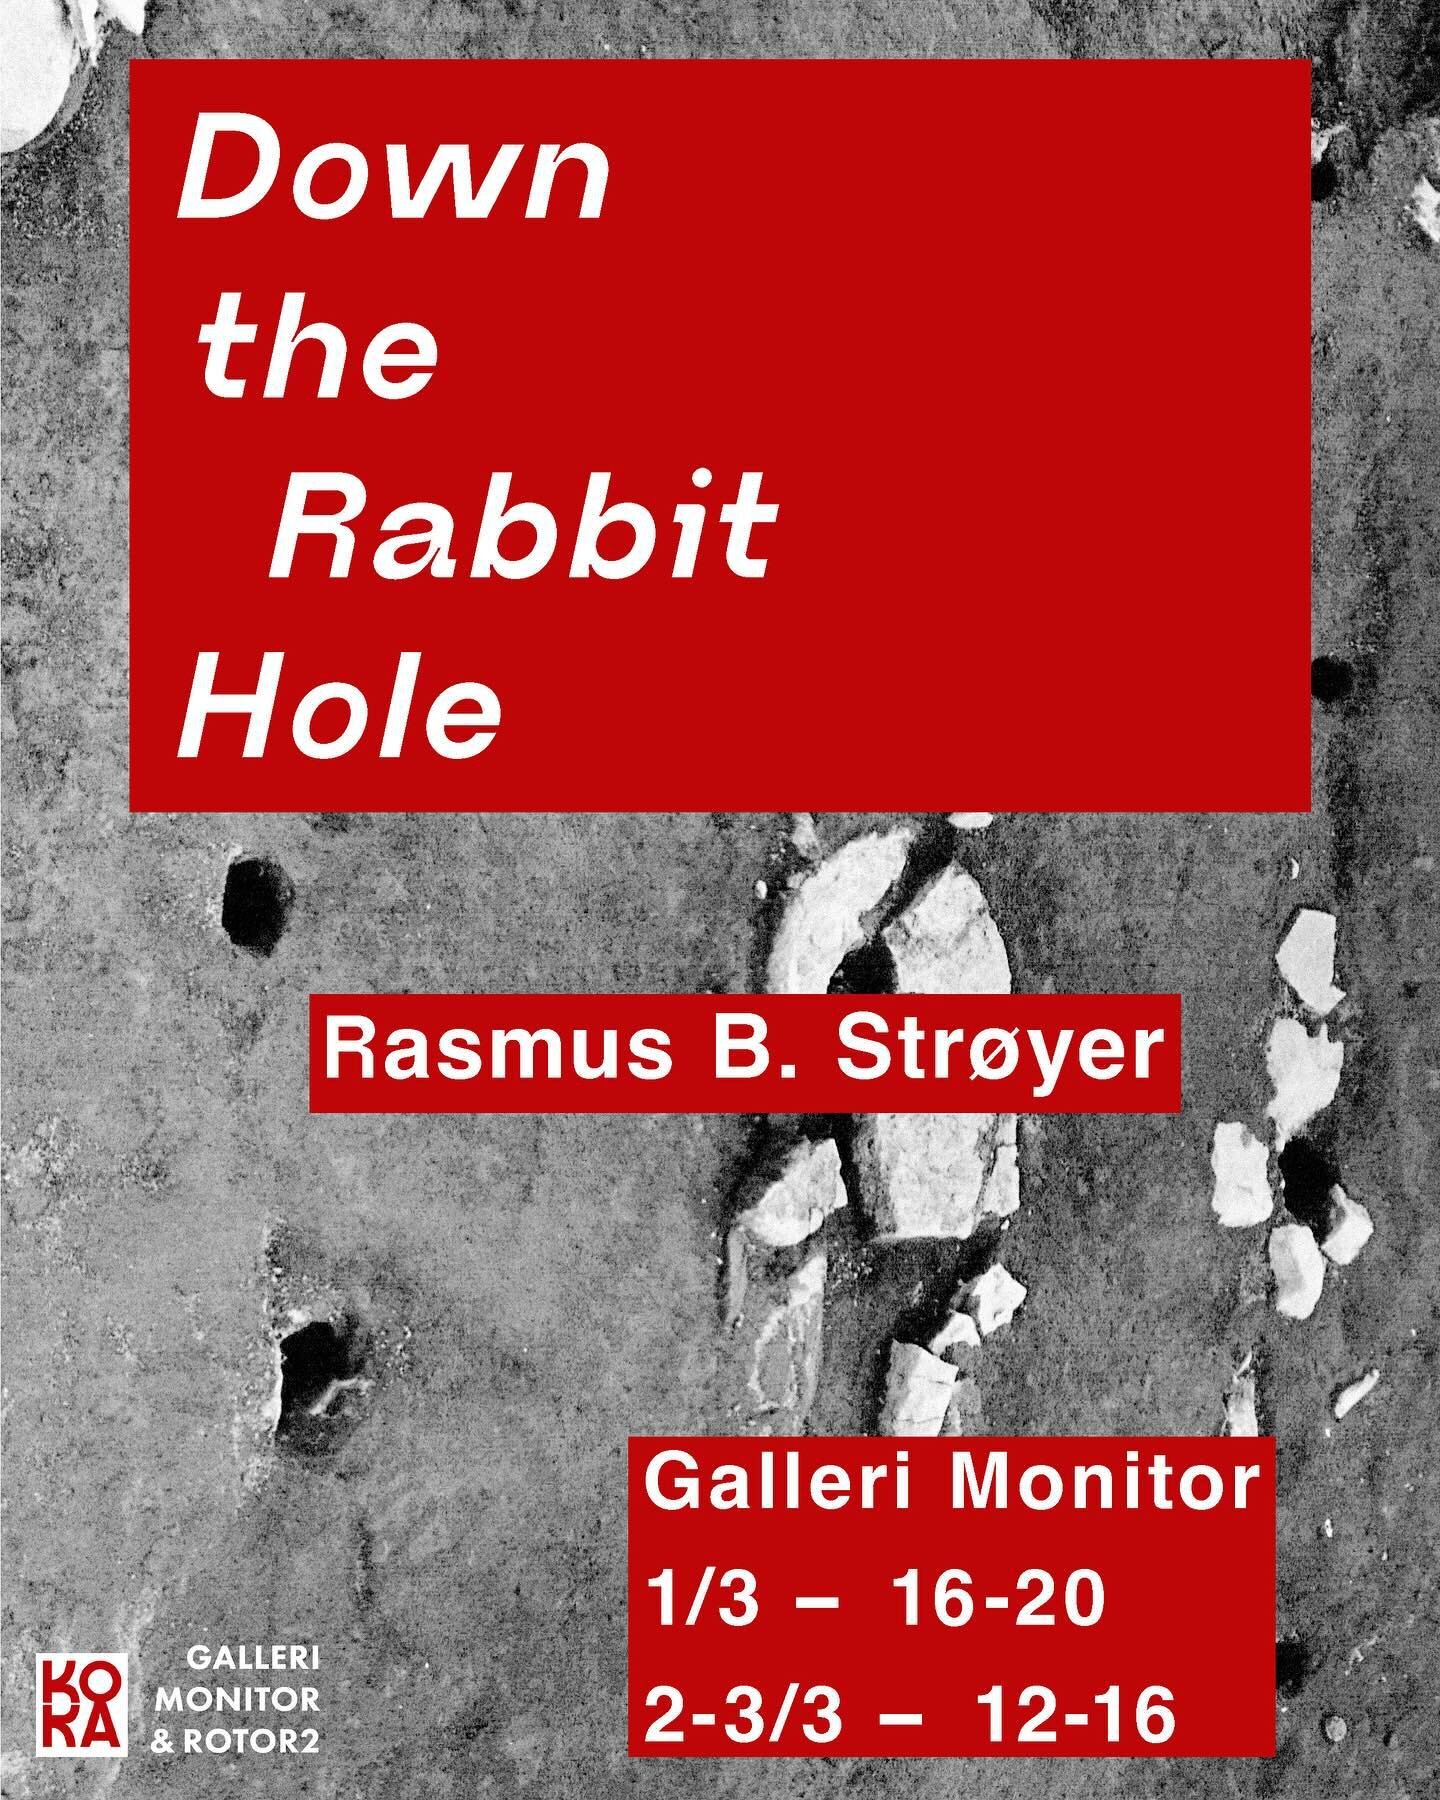 Down the Rabbit Hole

Opening today in Gallery Monitor! 

Opening hours 
Friday: 16-20
Saturday &amp; Sunday: 12-16 

#hdkvaland #gallerimonitor